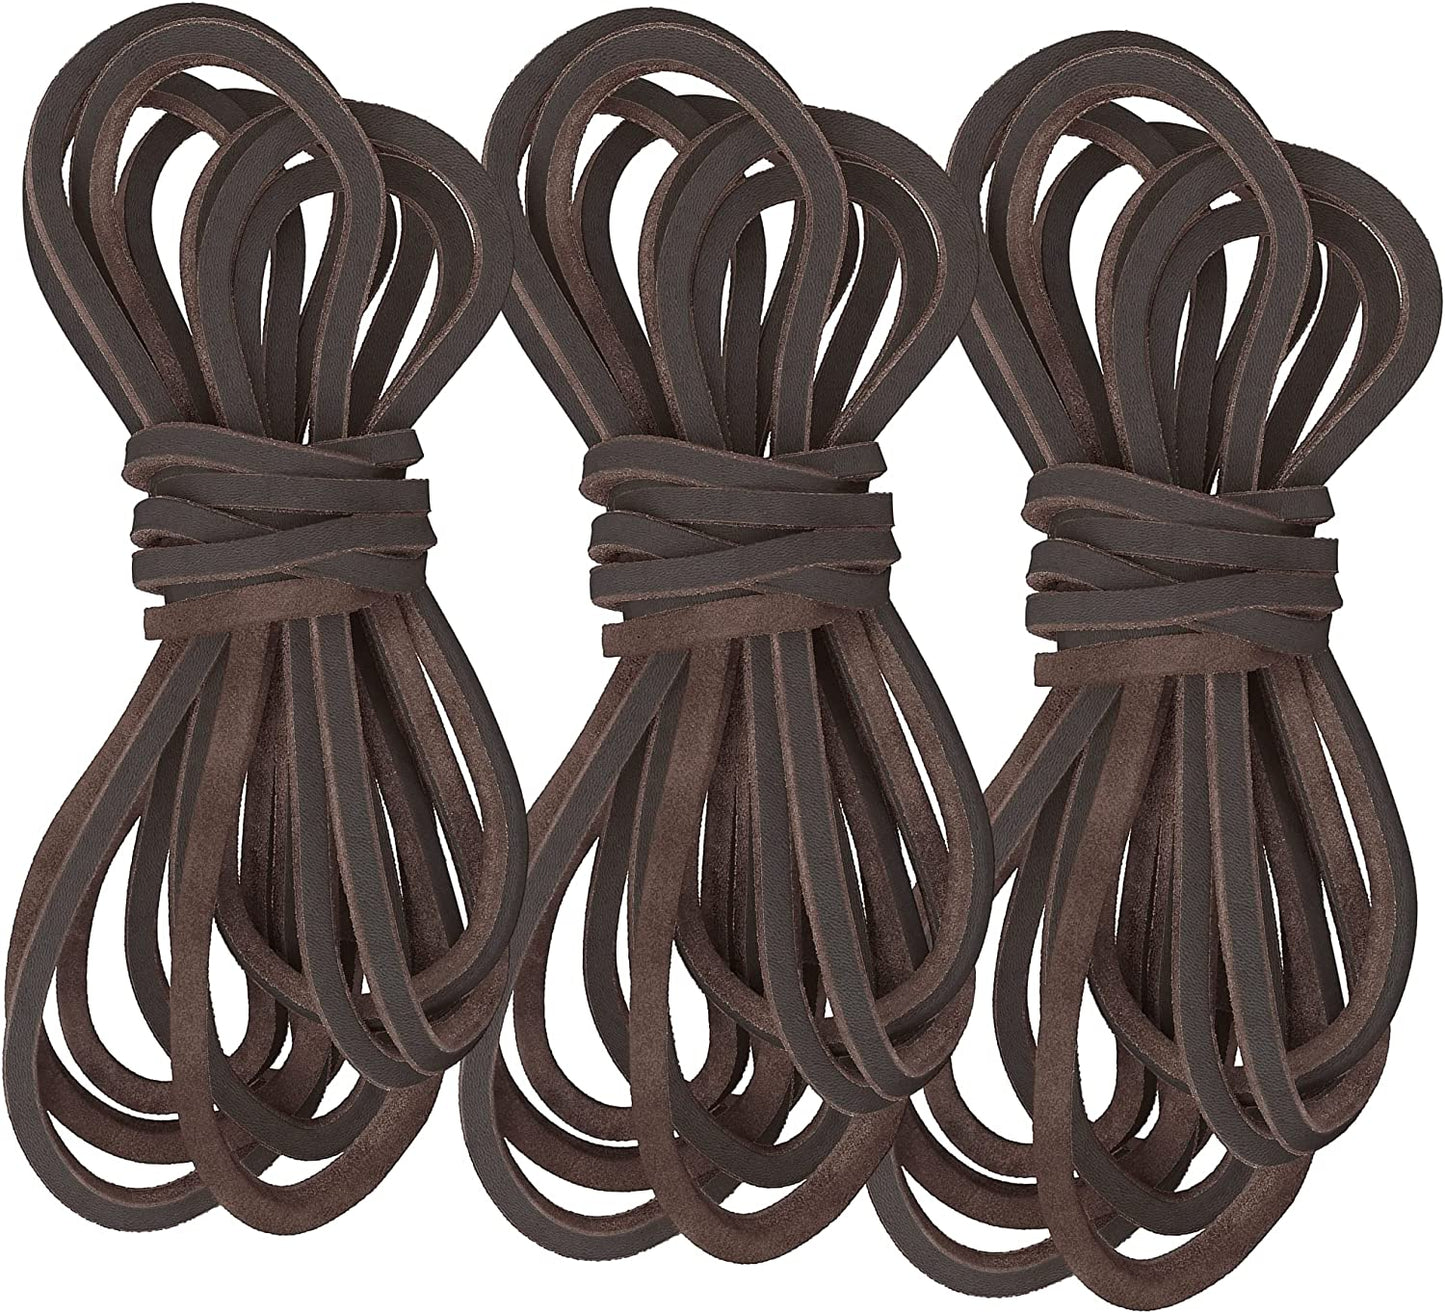 TOFL Logger Style 3 Leather Boot Laces | 54 Inches Long | 3 Strips | 1 Pair & 1 Spare Dark Brown with Stripe Laces